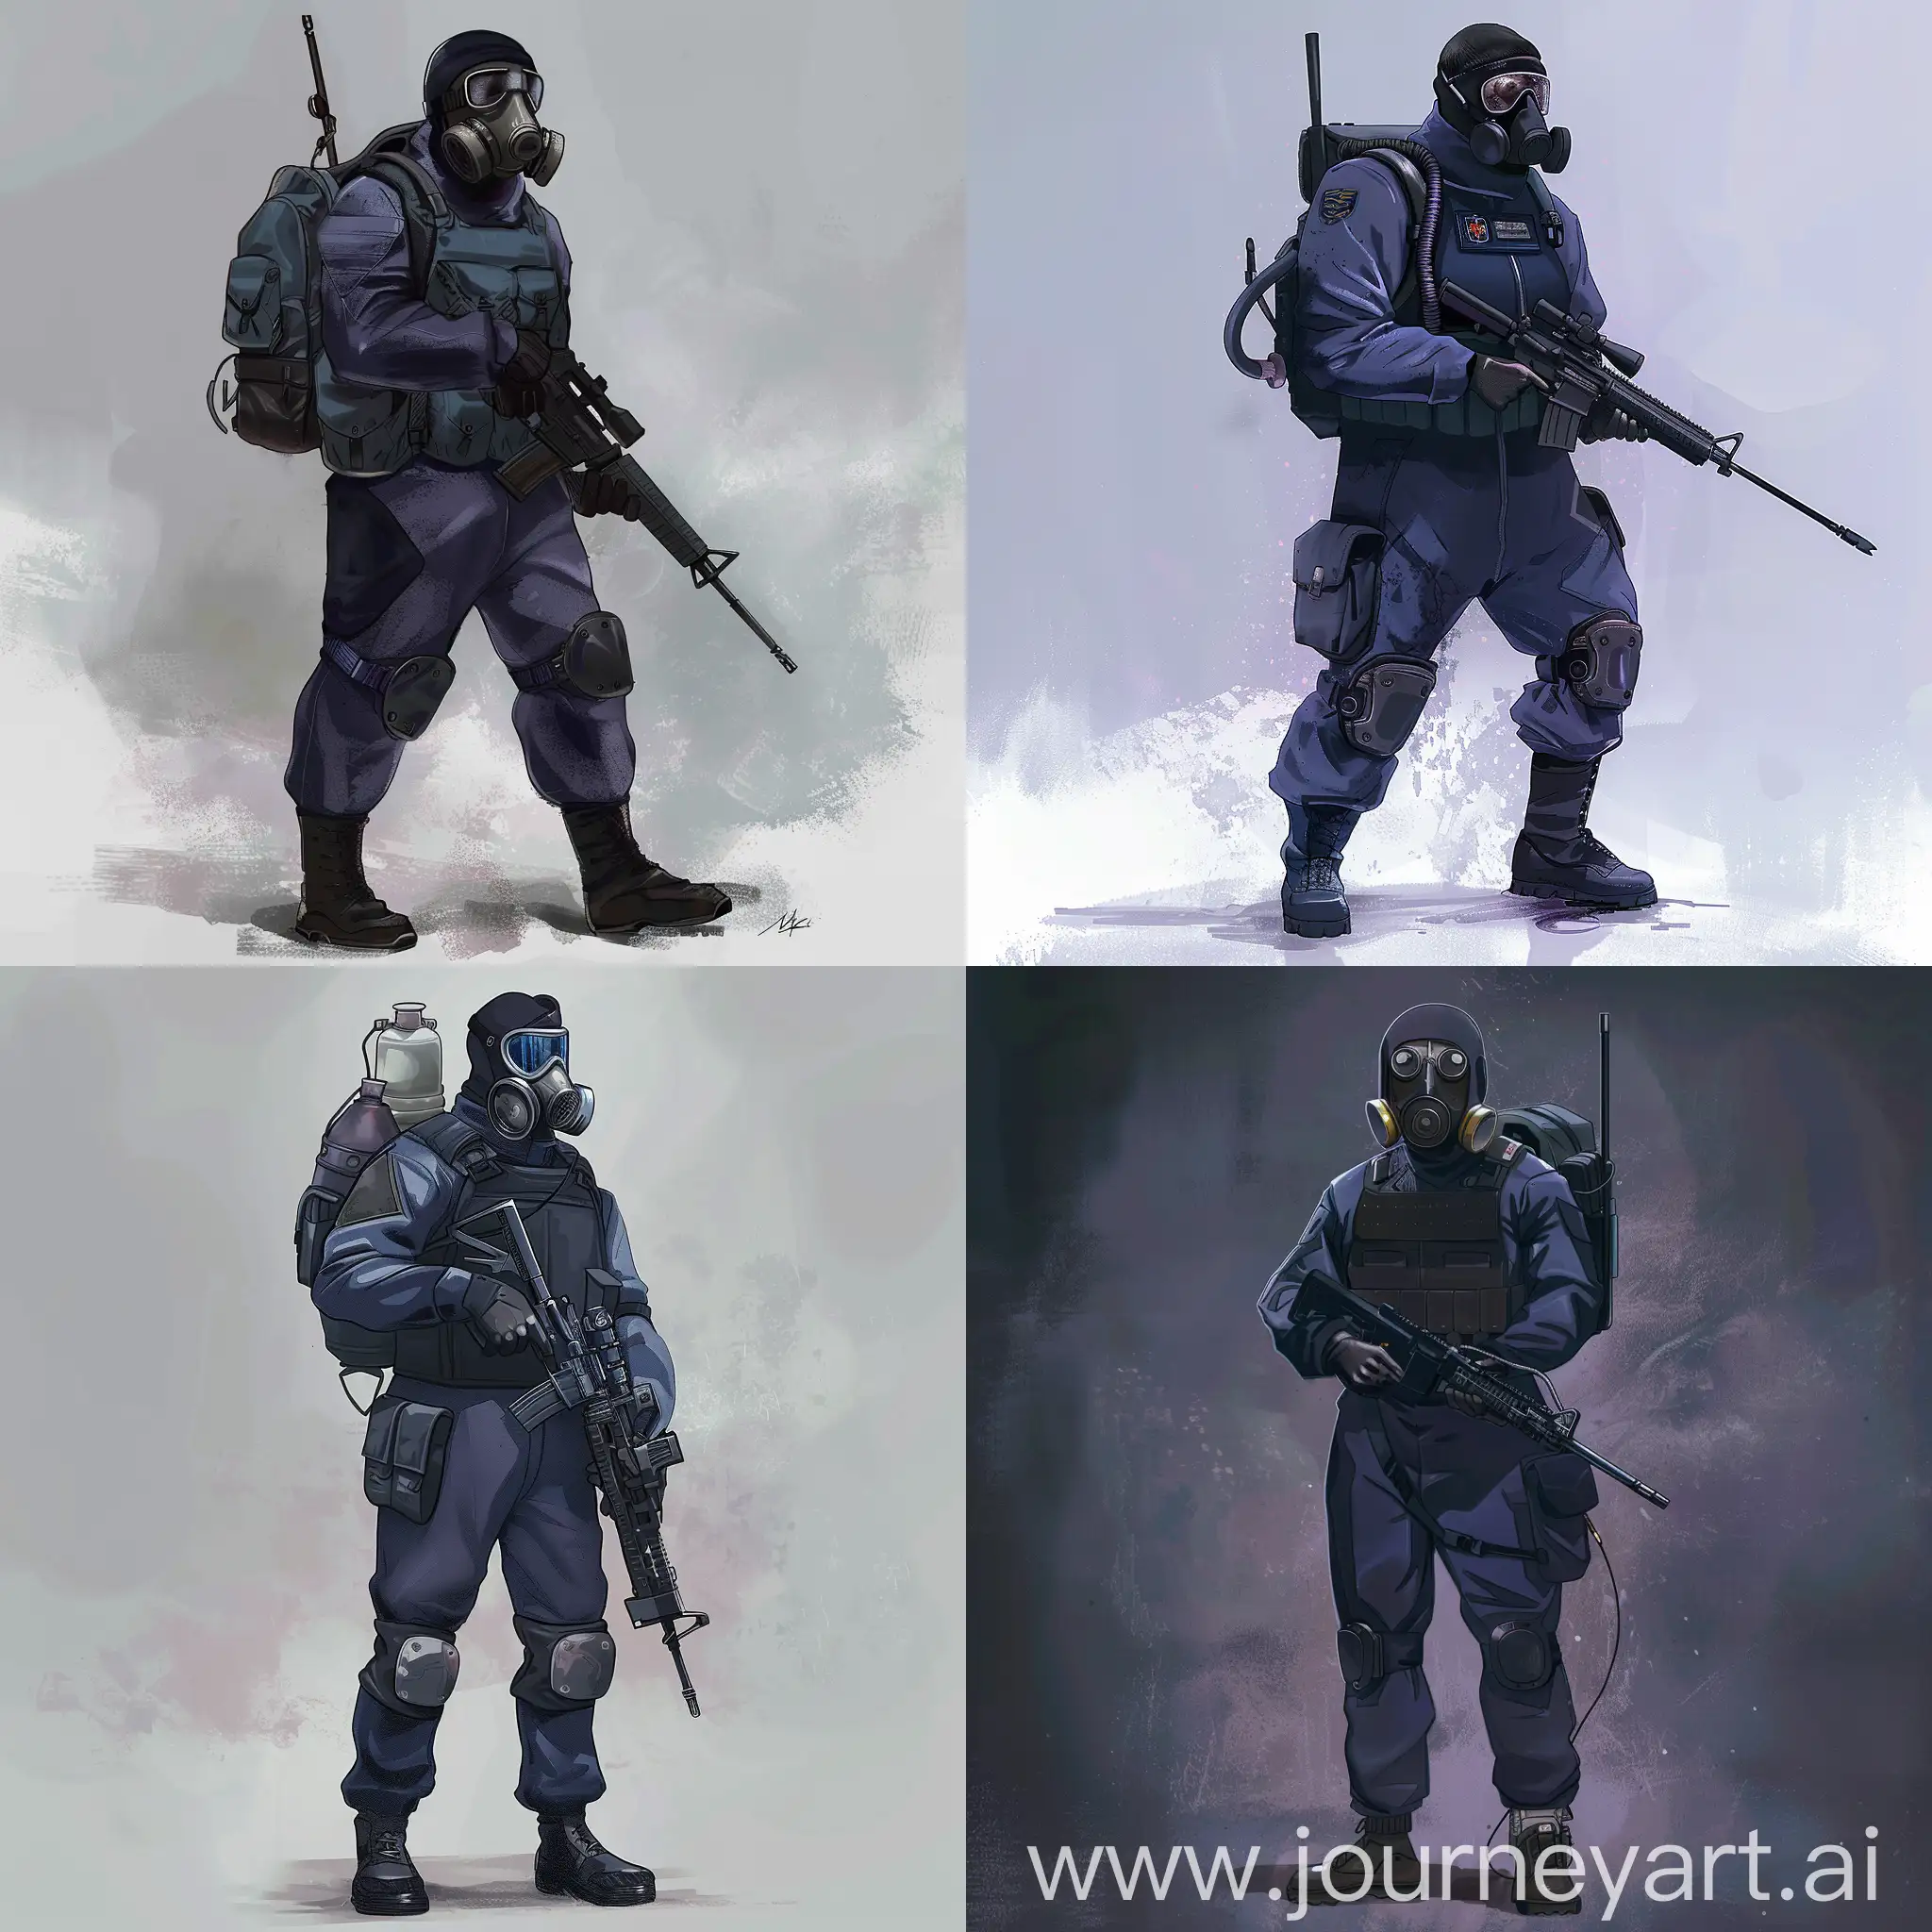 Concept character art, dark purple military suit, hazmat protective gasmask on his face, small military backpack, military unloading on his body, sniper rifle in his hands, there is also a mechanical prosthesis on the arm.